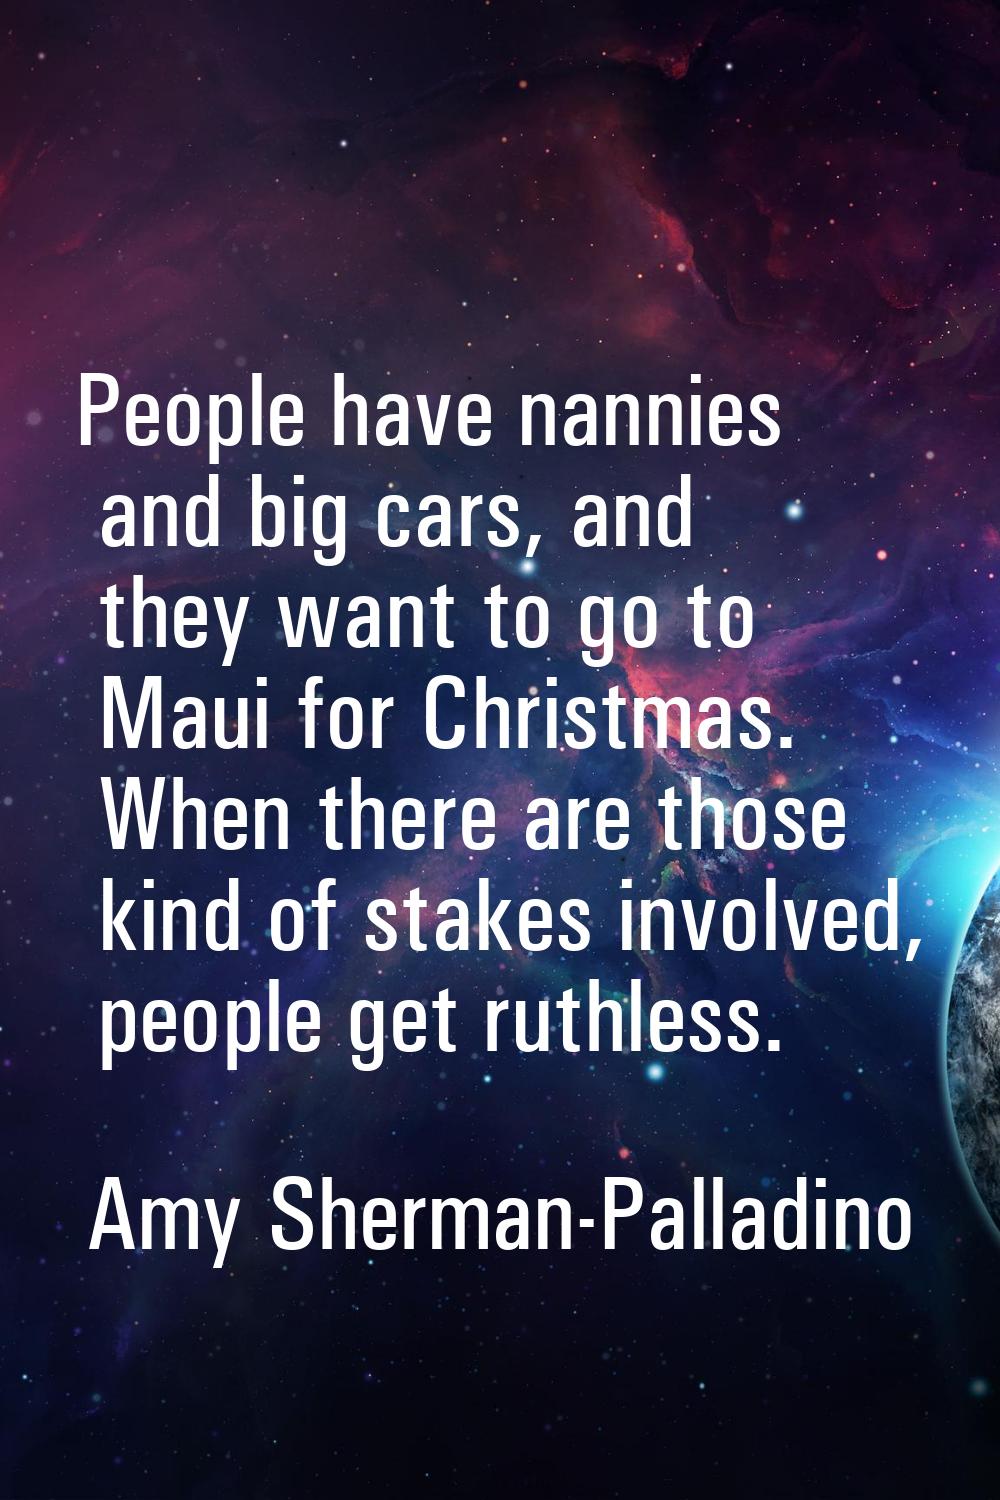 People have nannies and big cars, and they want to go to Maui for Christmas. When there are those k